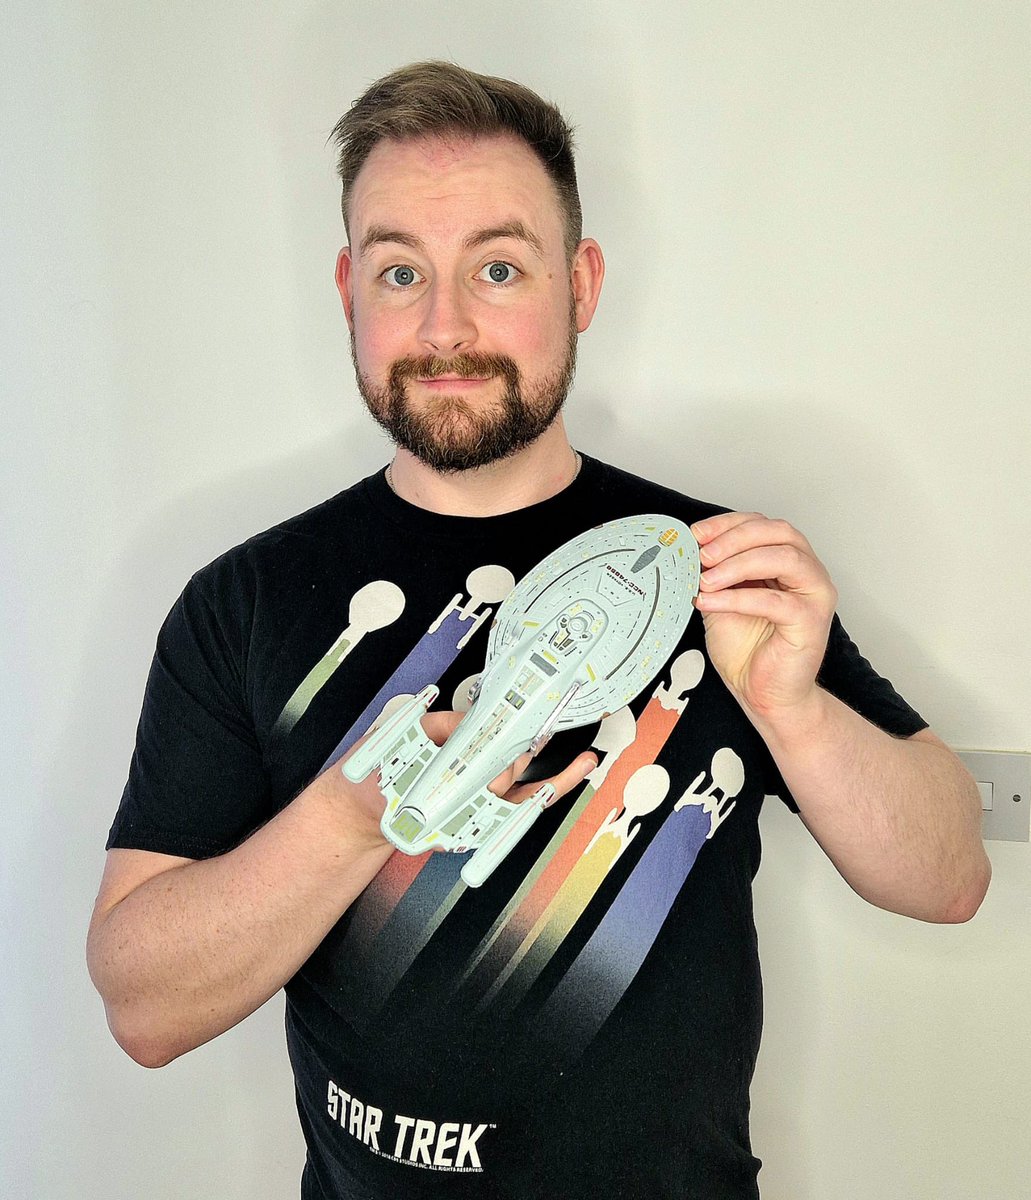 🚨FREE GIVEAWAY🚨 Who wants to win a FREE Eaglemoss XL USS Voyager? (Modelled here by the lovely @seanferrick!) Simply sign up to @MasterReplicas newsletter over at masterreplicas.com - and then like and share this post! The winner will be picked this week…GO! #StarTrek